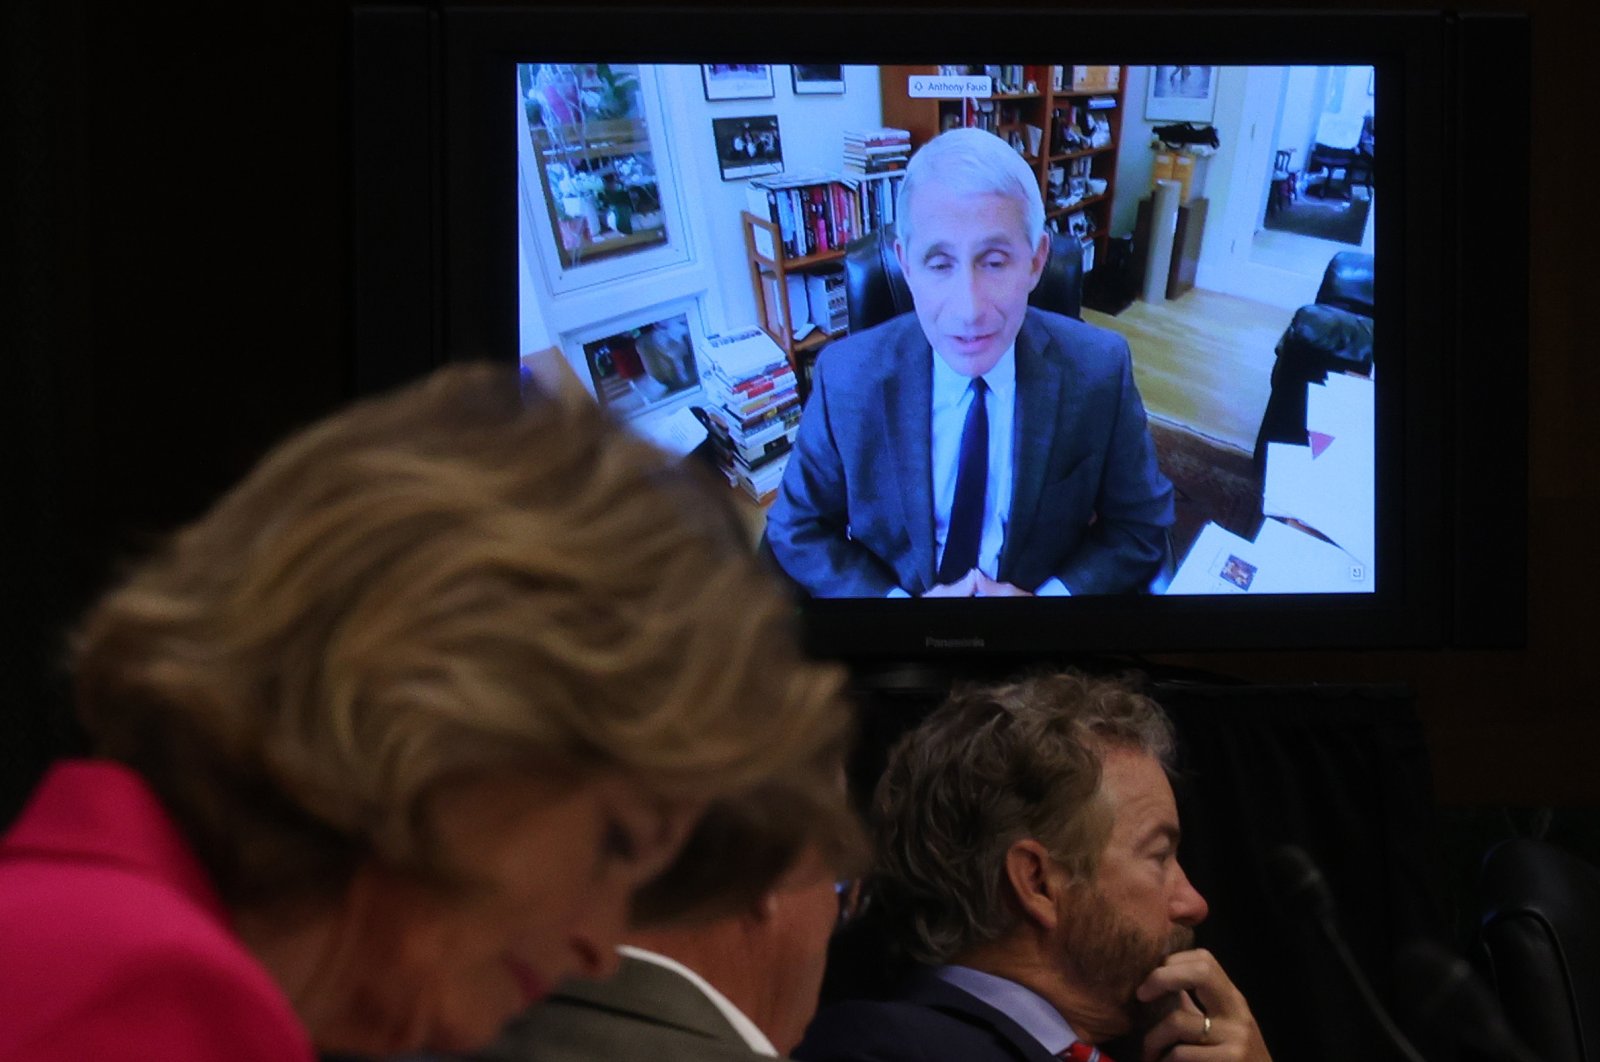 Senators listen to Dr. Anthony Fauci, director of the National Institute of Allergy and Infectious Diseases speak remotely during a Senate committee meeting, Washington, May 12, 2020. (AFP Photo)